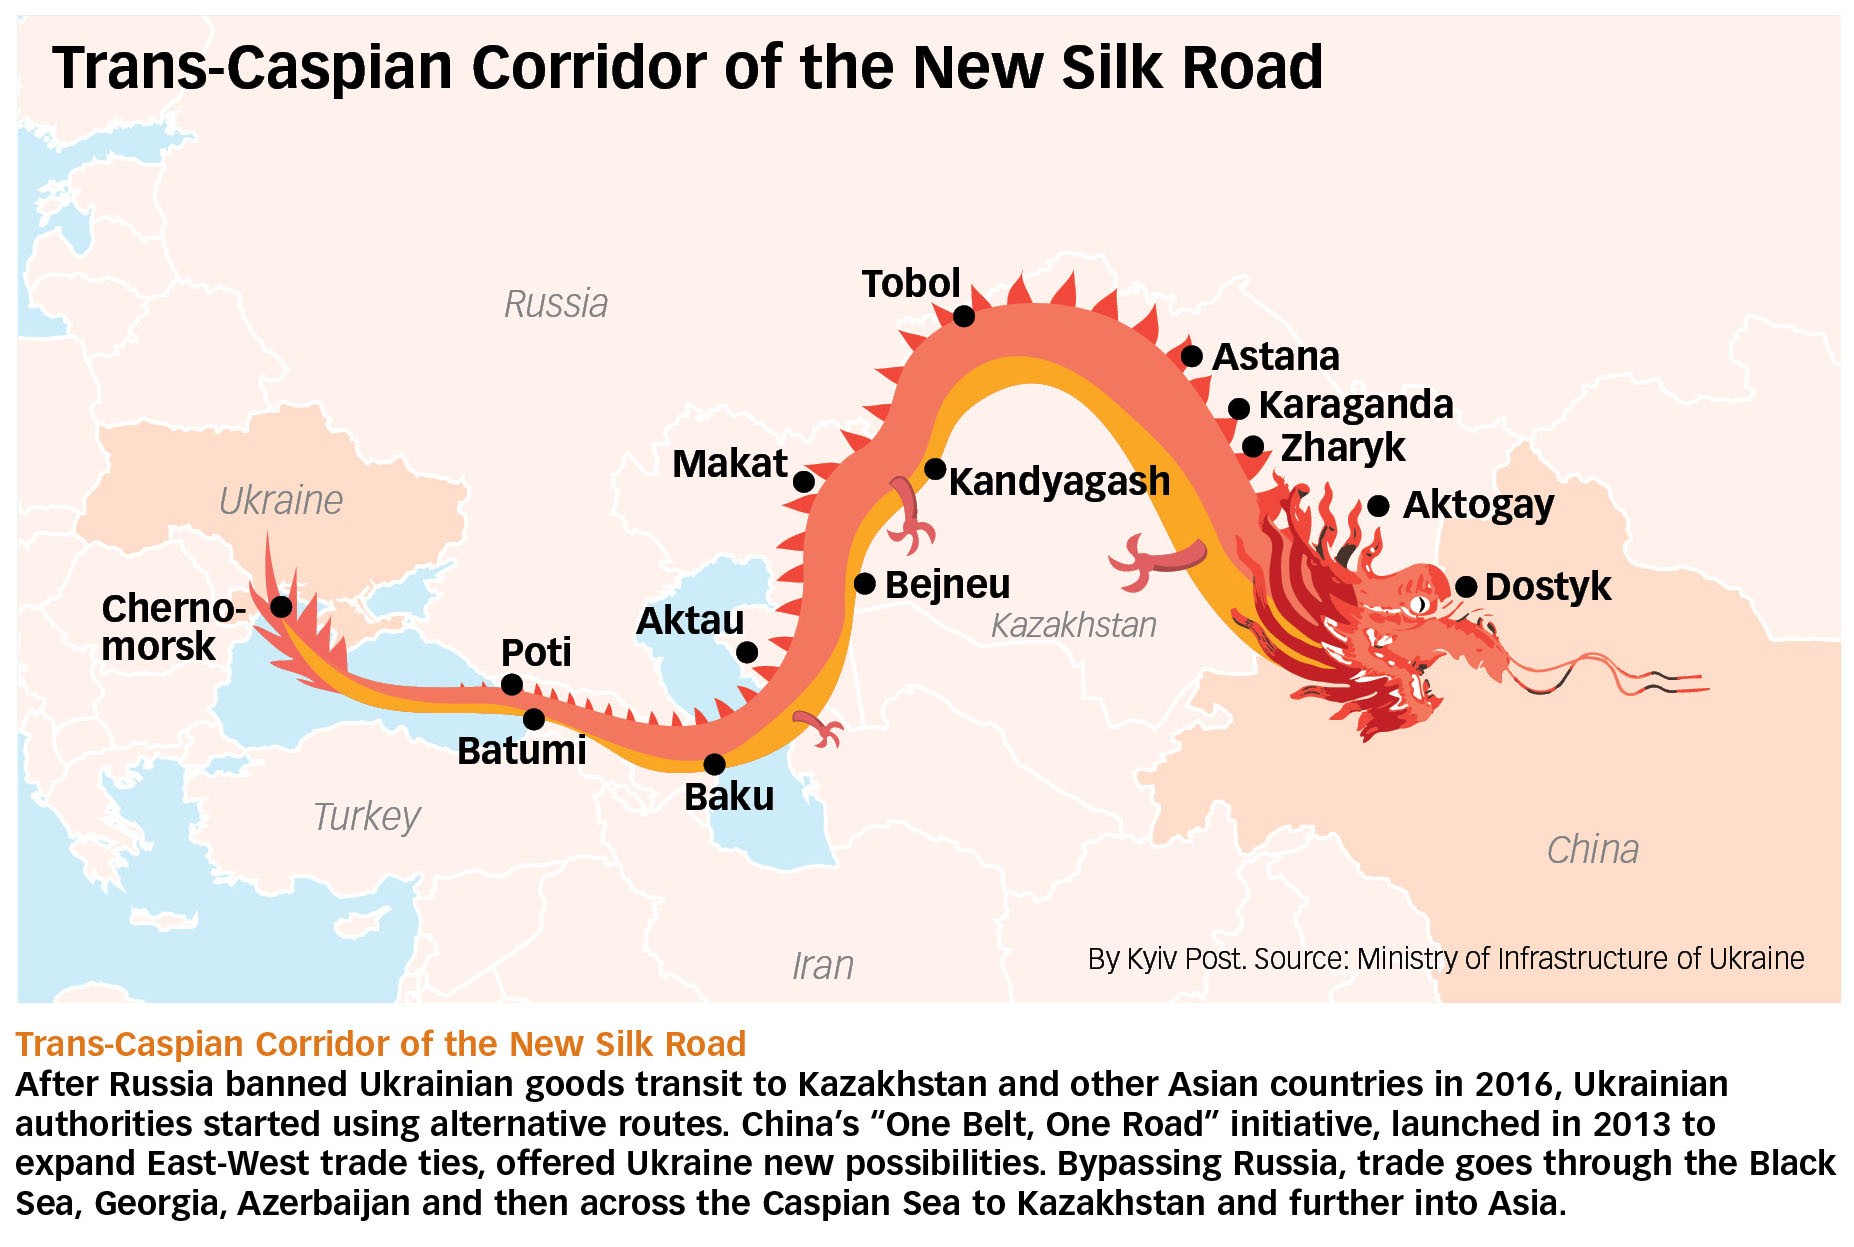 Trans-Caspian Corridor of the New Silk Road After Russia banned Ukrainian goods transit to Kazakhstan and other Asian countries in 2016, Ukrainian authorities started using alternative routes. China’s “One Belt, One Road” initiative, launched in 2013 to expand East-West trade ties, offered Ukraine new possibilities. Bypassing Russia, trade goes through the Black Sea, Georgia, Azerbaijan and then across the Caspian Sea to Kazakhstan and further into Asia.